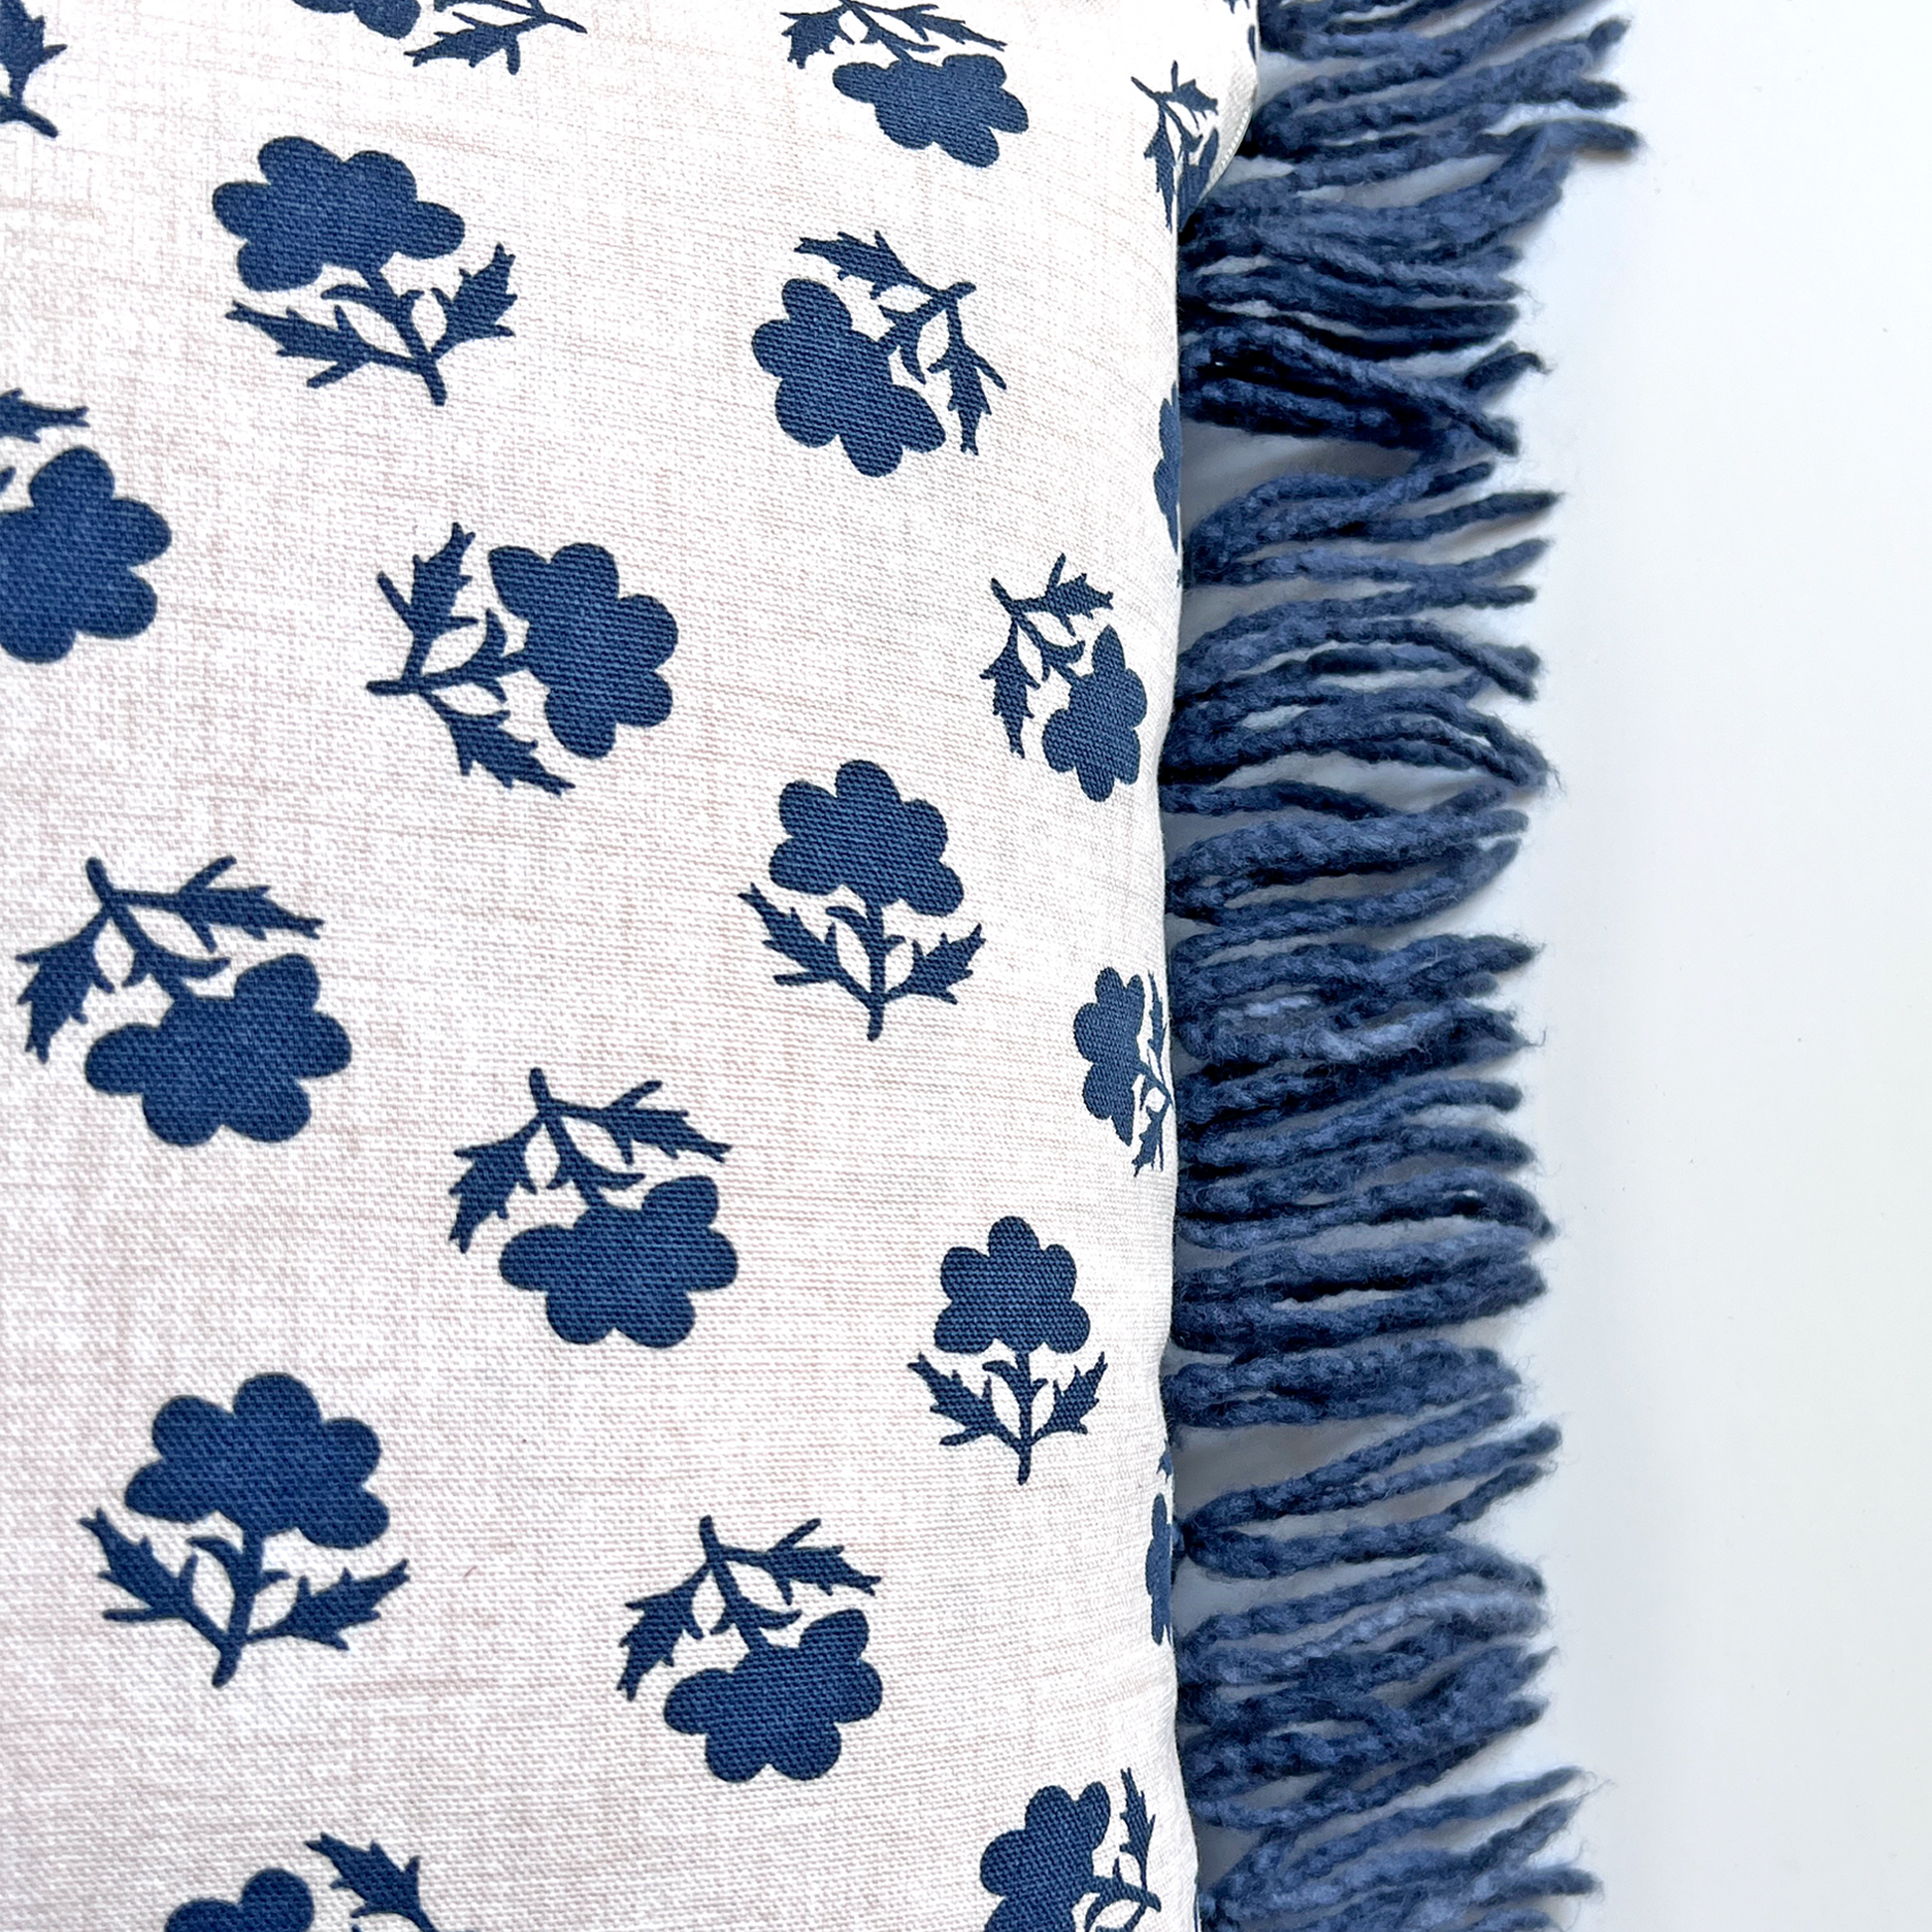 The back of this uniquely fringed pillow is a natural cotton canvas with a medium-sized navy floral print.